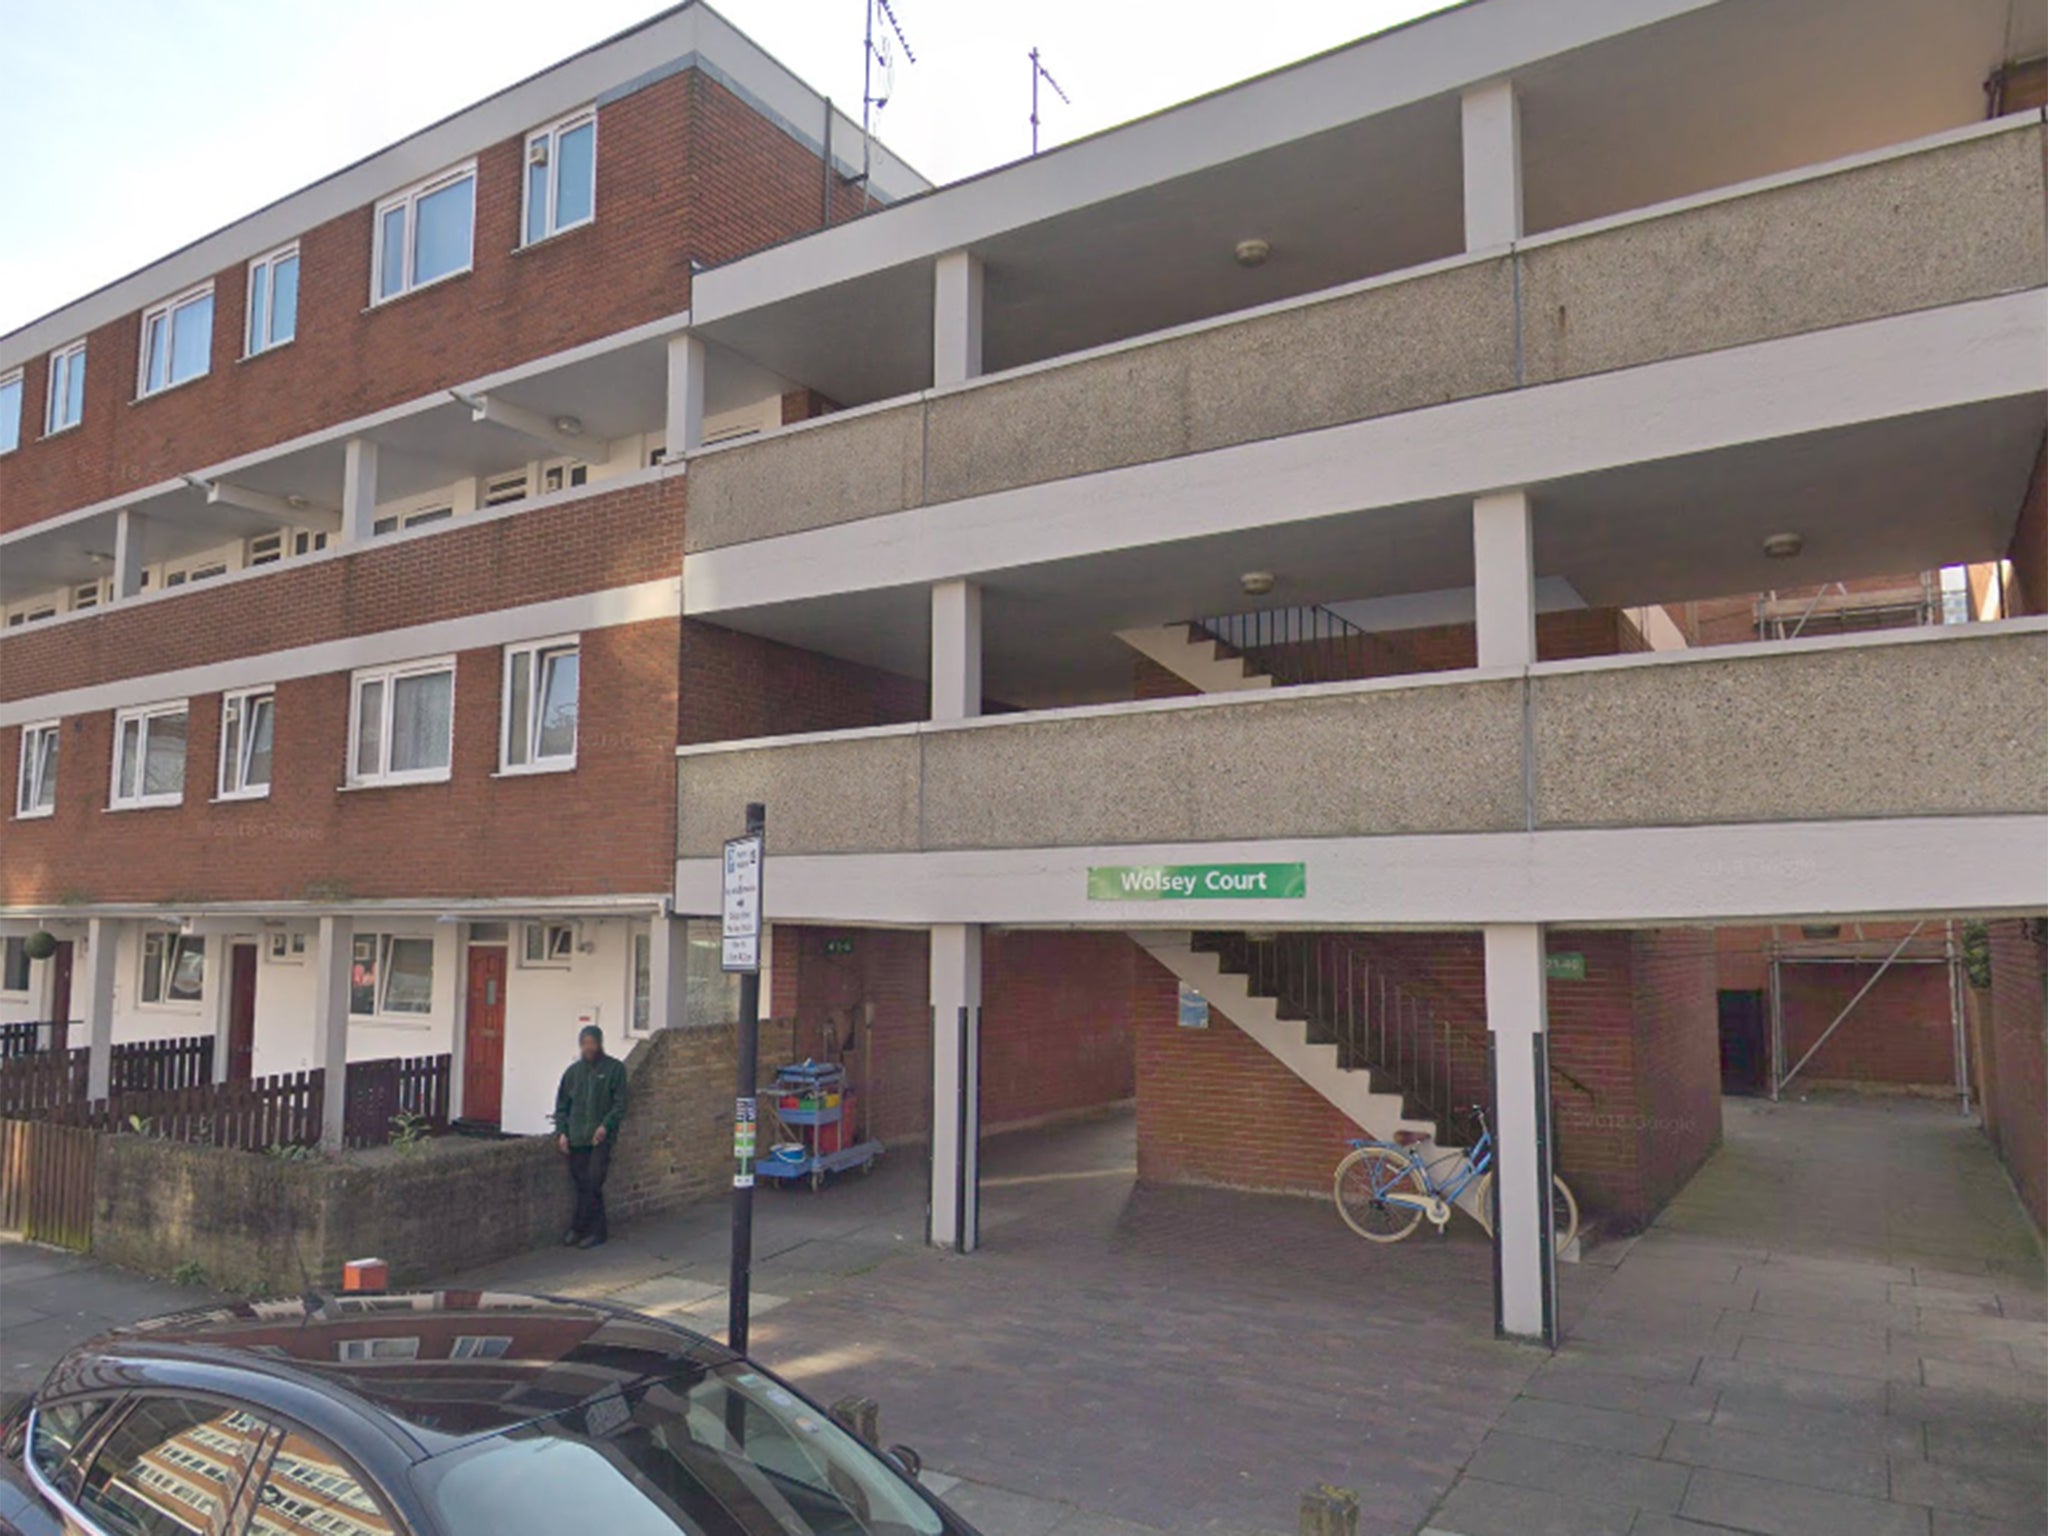 A teenager was stabbed to death in Wolsey Court, Battersea